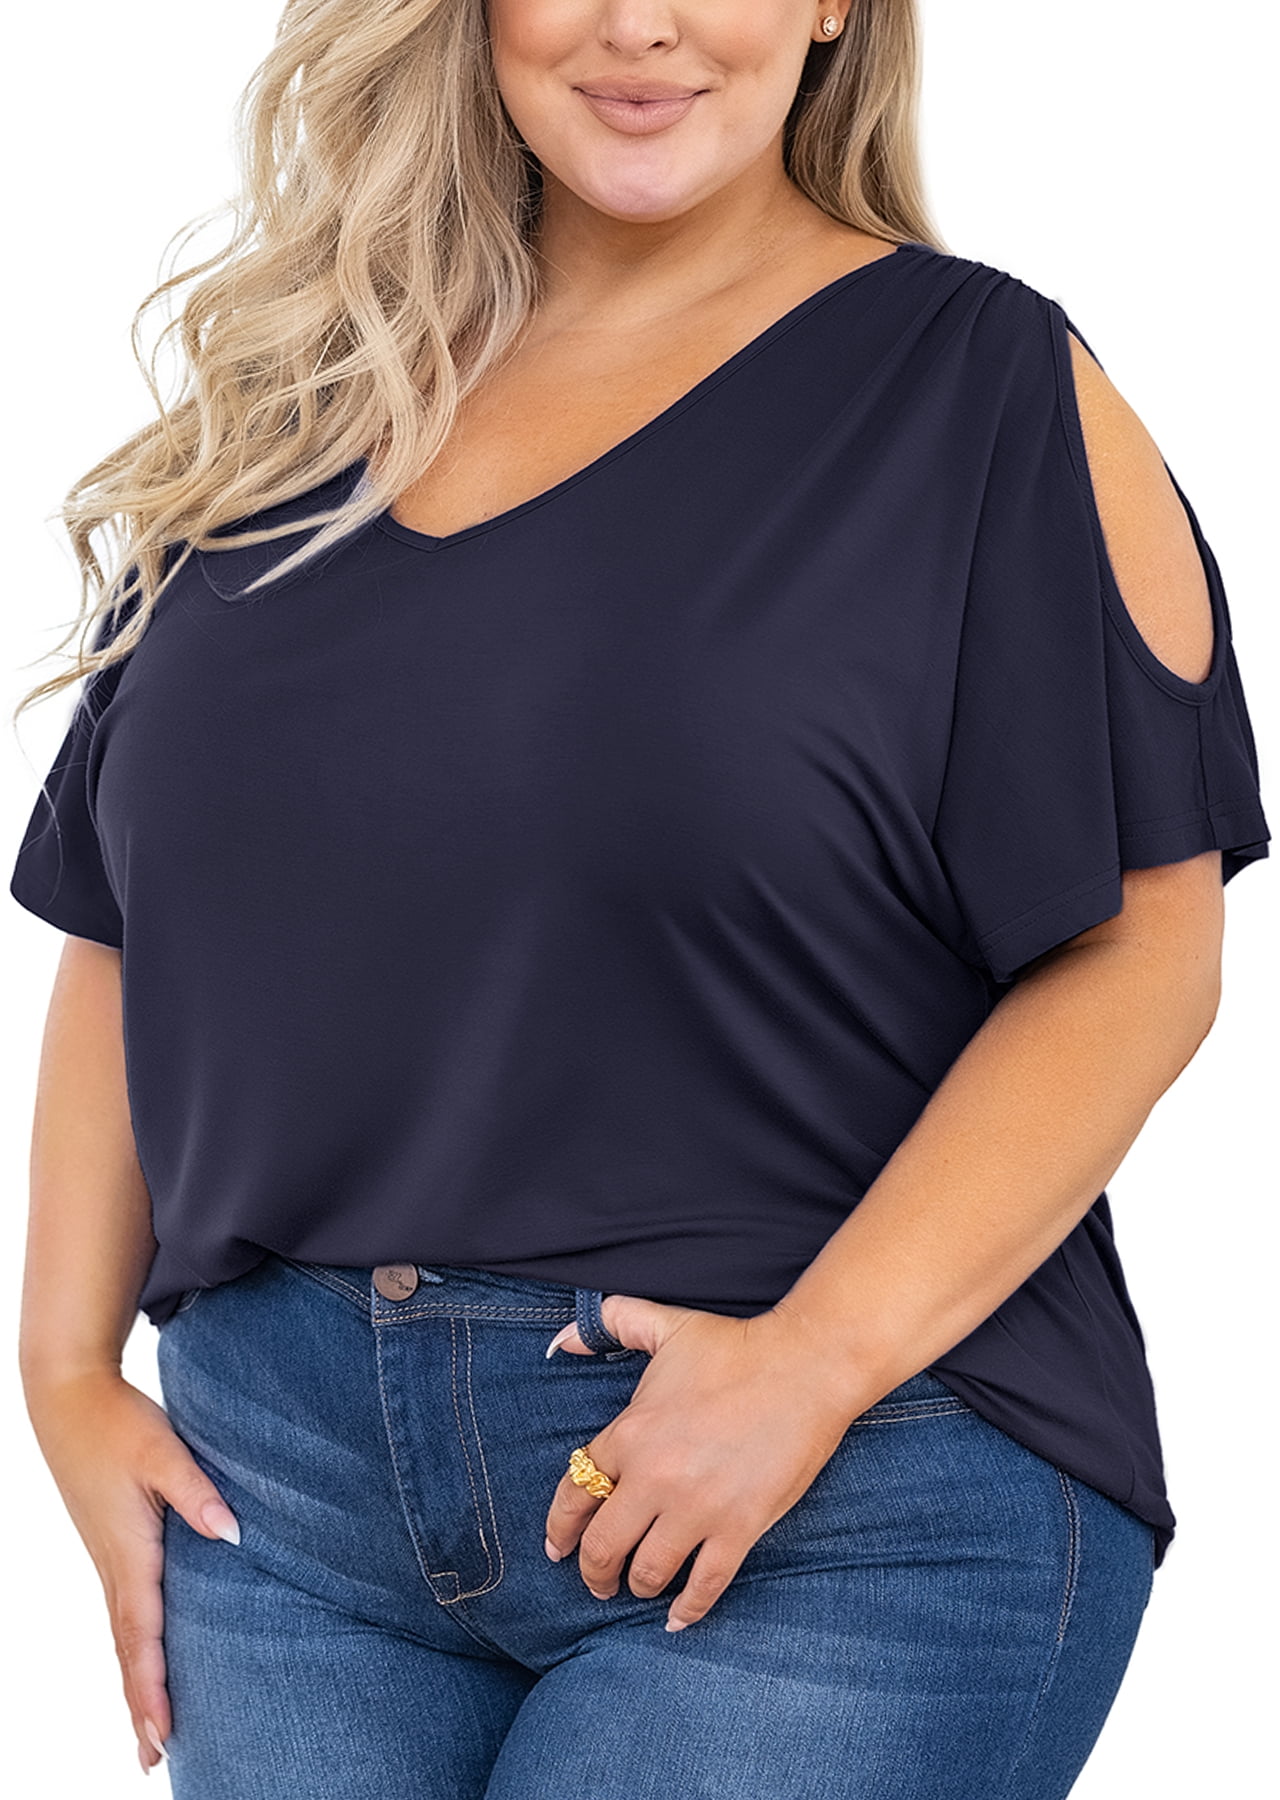 SHOWMALL Plus Size Tops for Women Cold Shoulder Clothes Navy Blue 2X Blouse  Short Sleeve Clothing V Neck Tunic Summer Shirts 